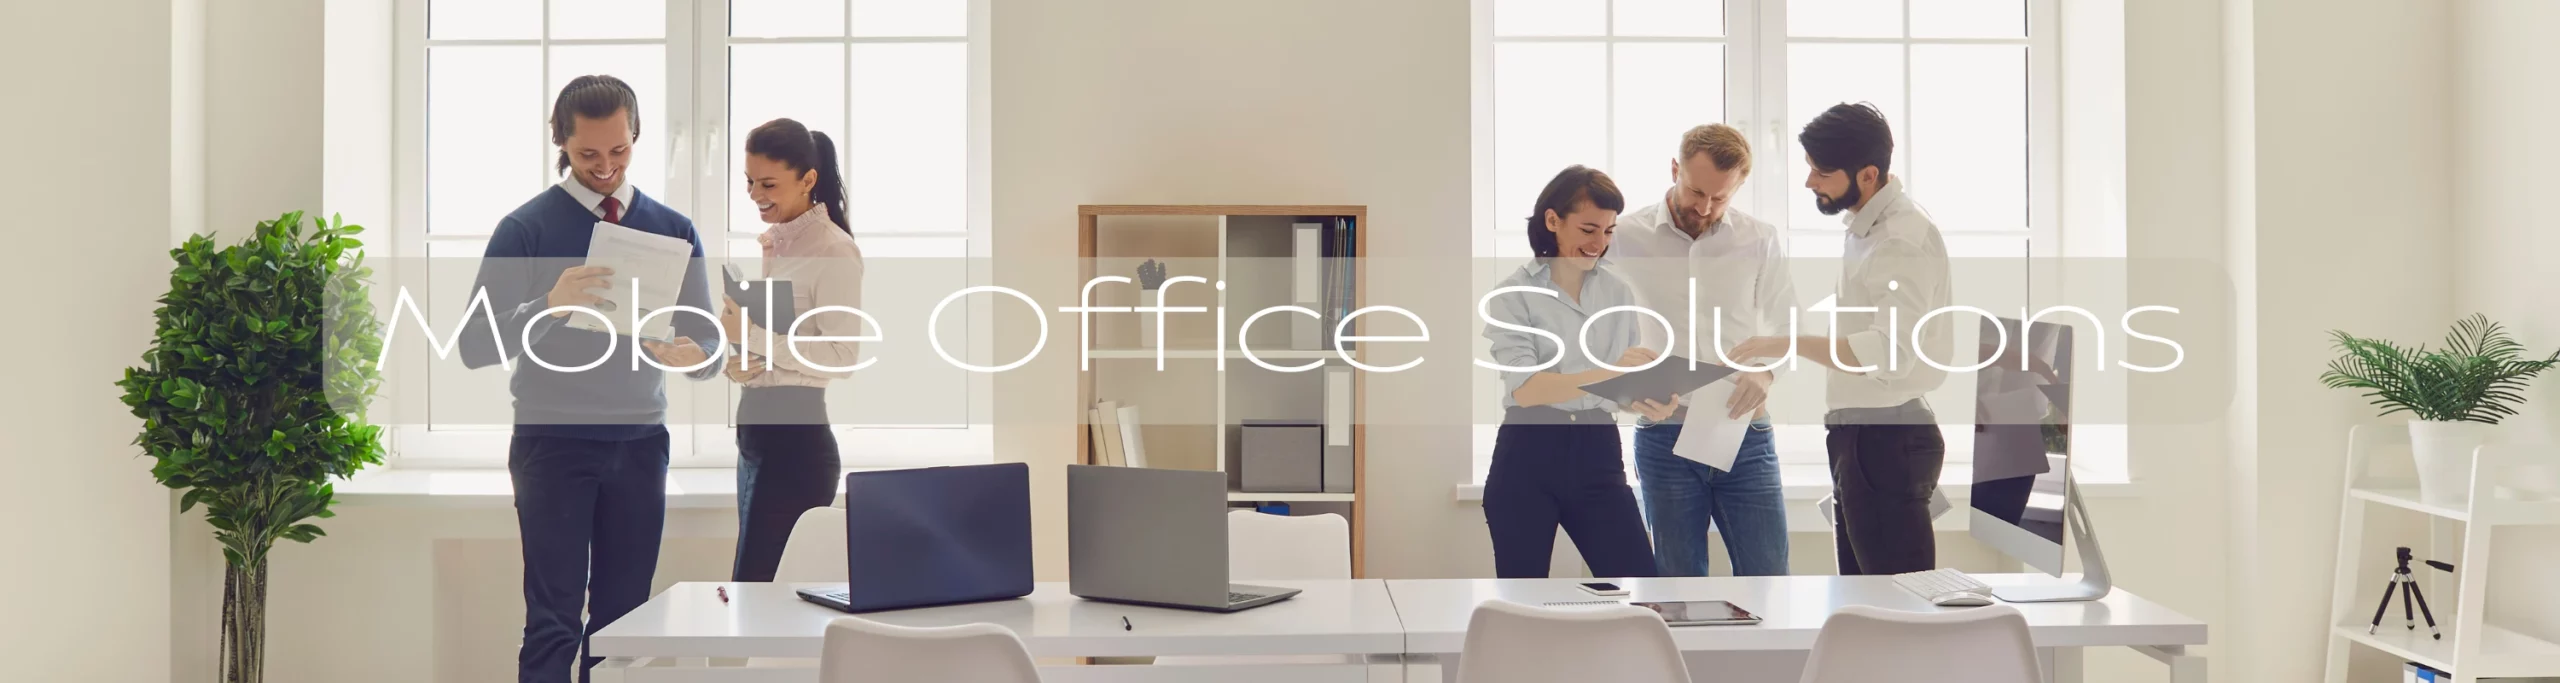 Mobile Office Solutions Banner